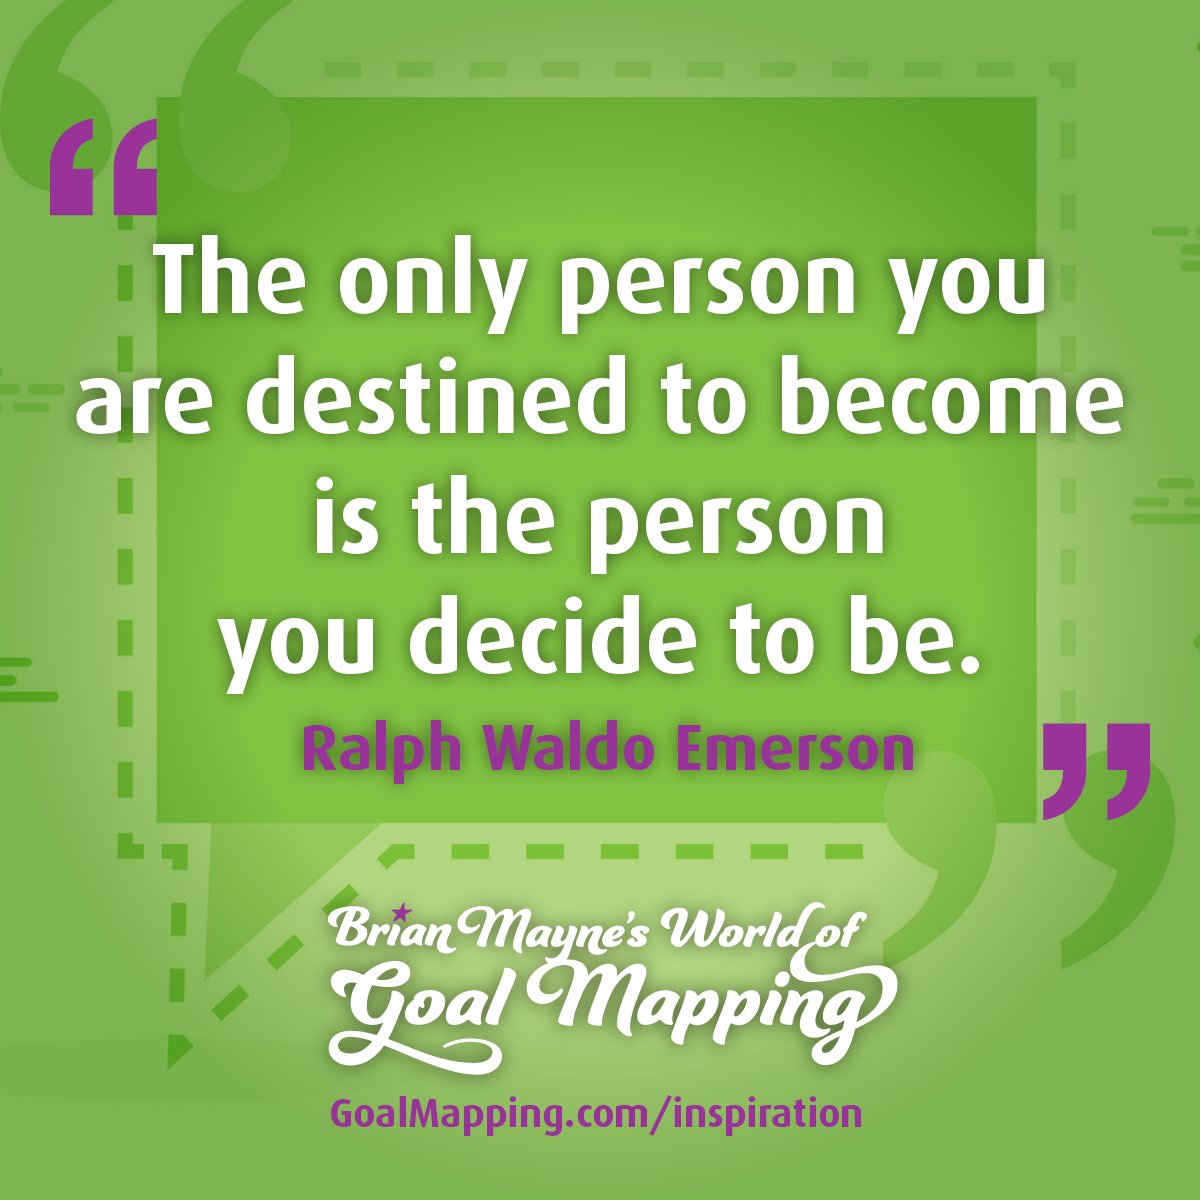 "The only person you are destined to become is the person you decide to be." Ralph Waldo Emerson